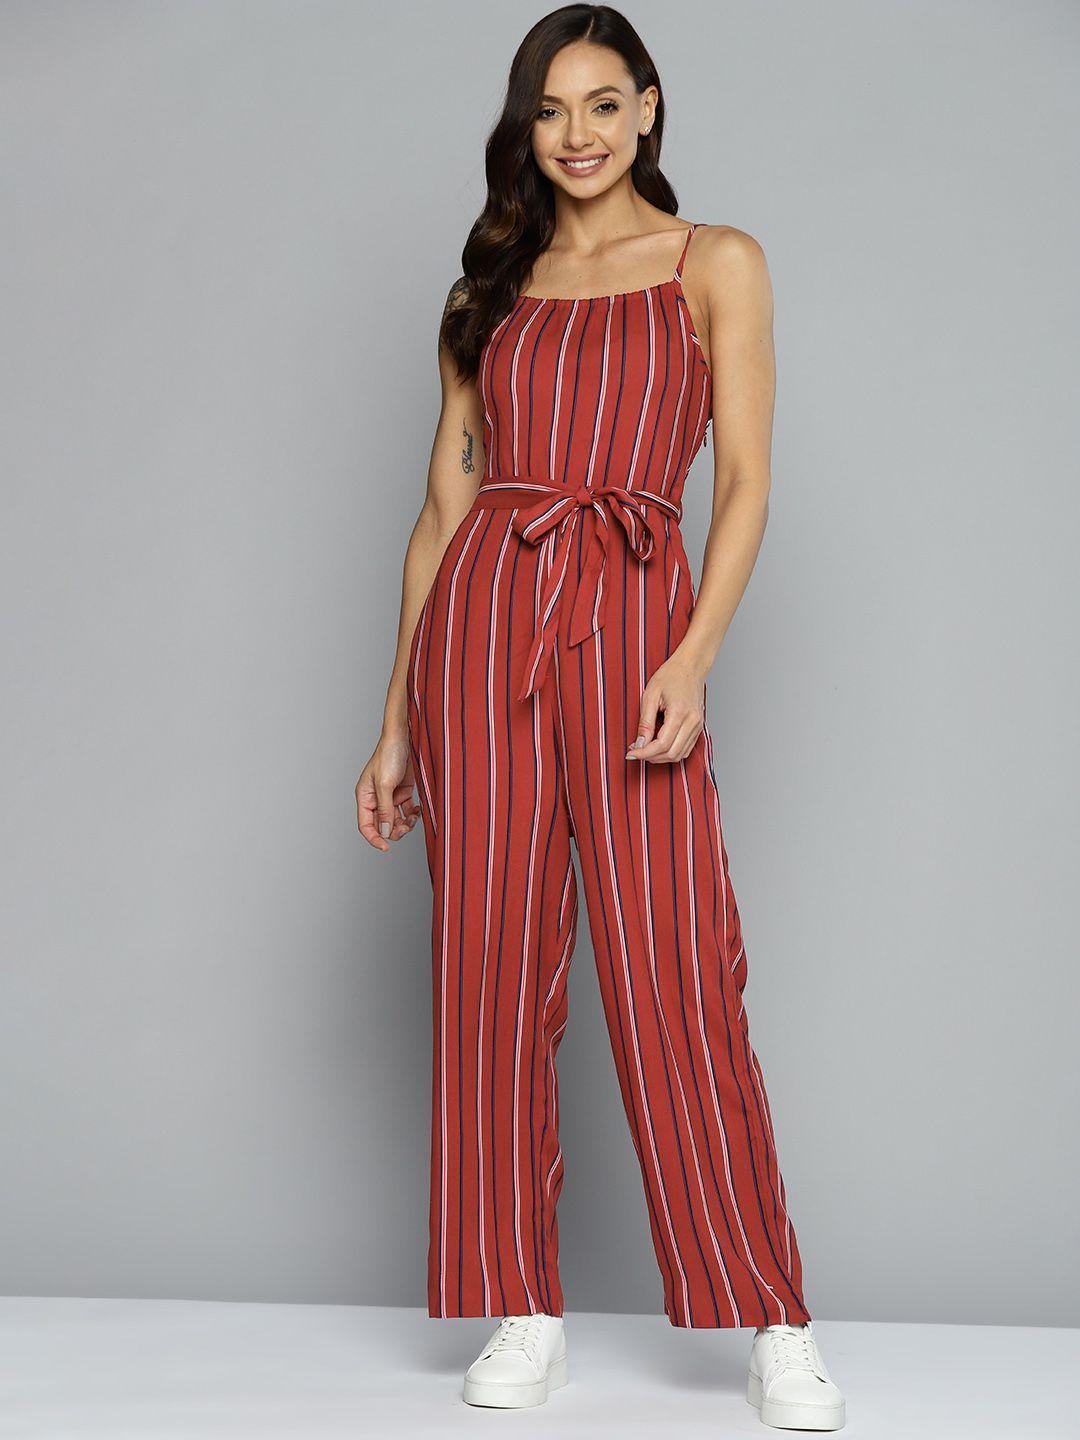 mast & harbour maroon & navy blue striped smocked detail jumpsuit comes with a belt